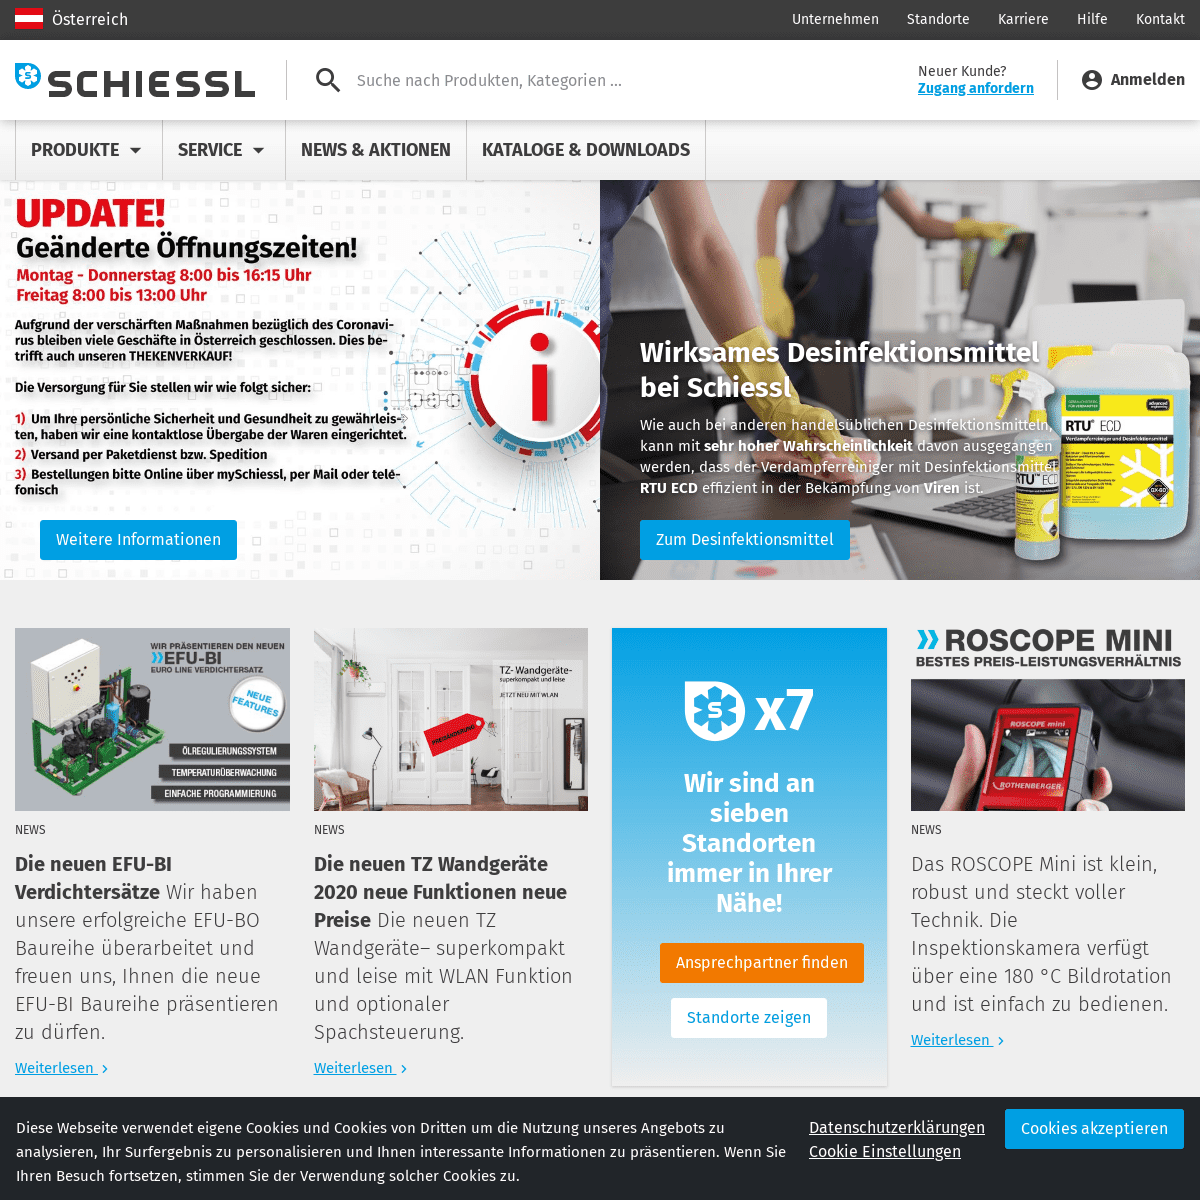 A complete backup of schiessl.at